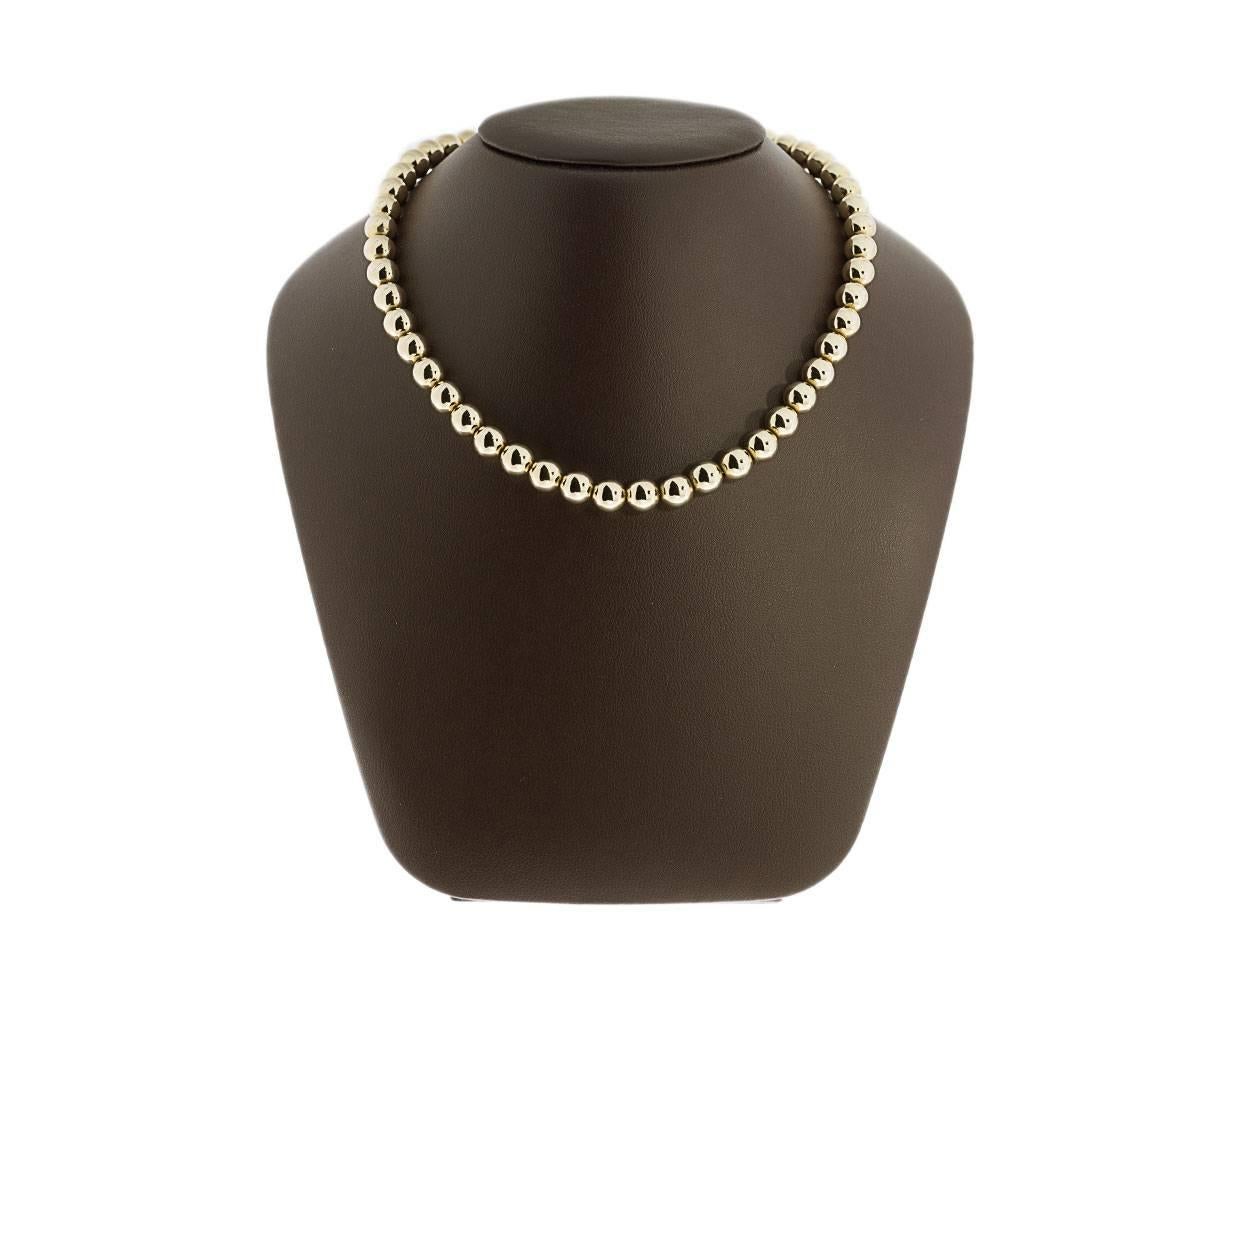 Tiffany & Co have long been revered for their fabulous diamonds & spectacular original designs that are coveted around the world. This stunning 14kt yellow gold Tiffany Bead Necklace is no exception! 

DETAILS:
14kt Yellow Gold
9 millimeter wide